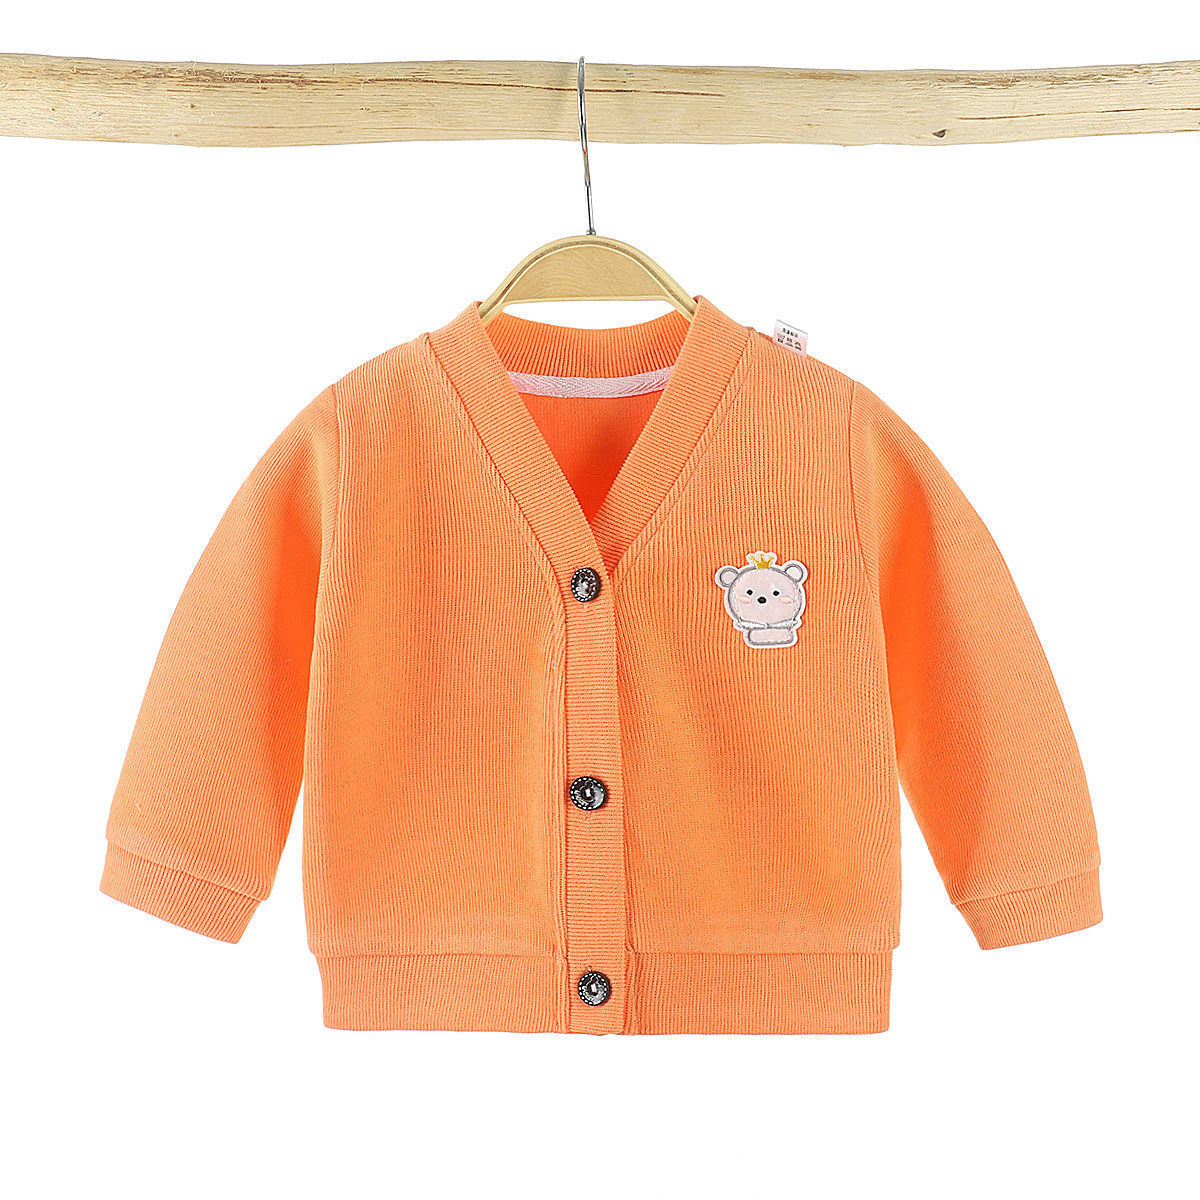 Boys' and girls' cotton coat 2020 autumn winter new infant children's sweater baby out knitted cardigan top